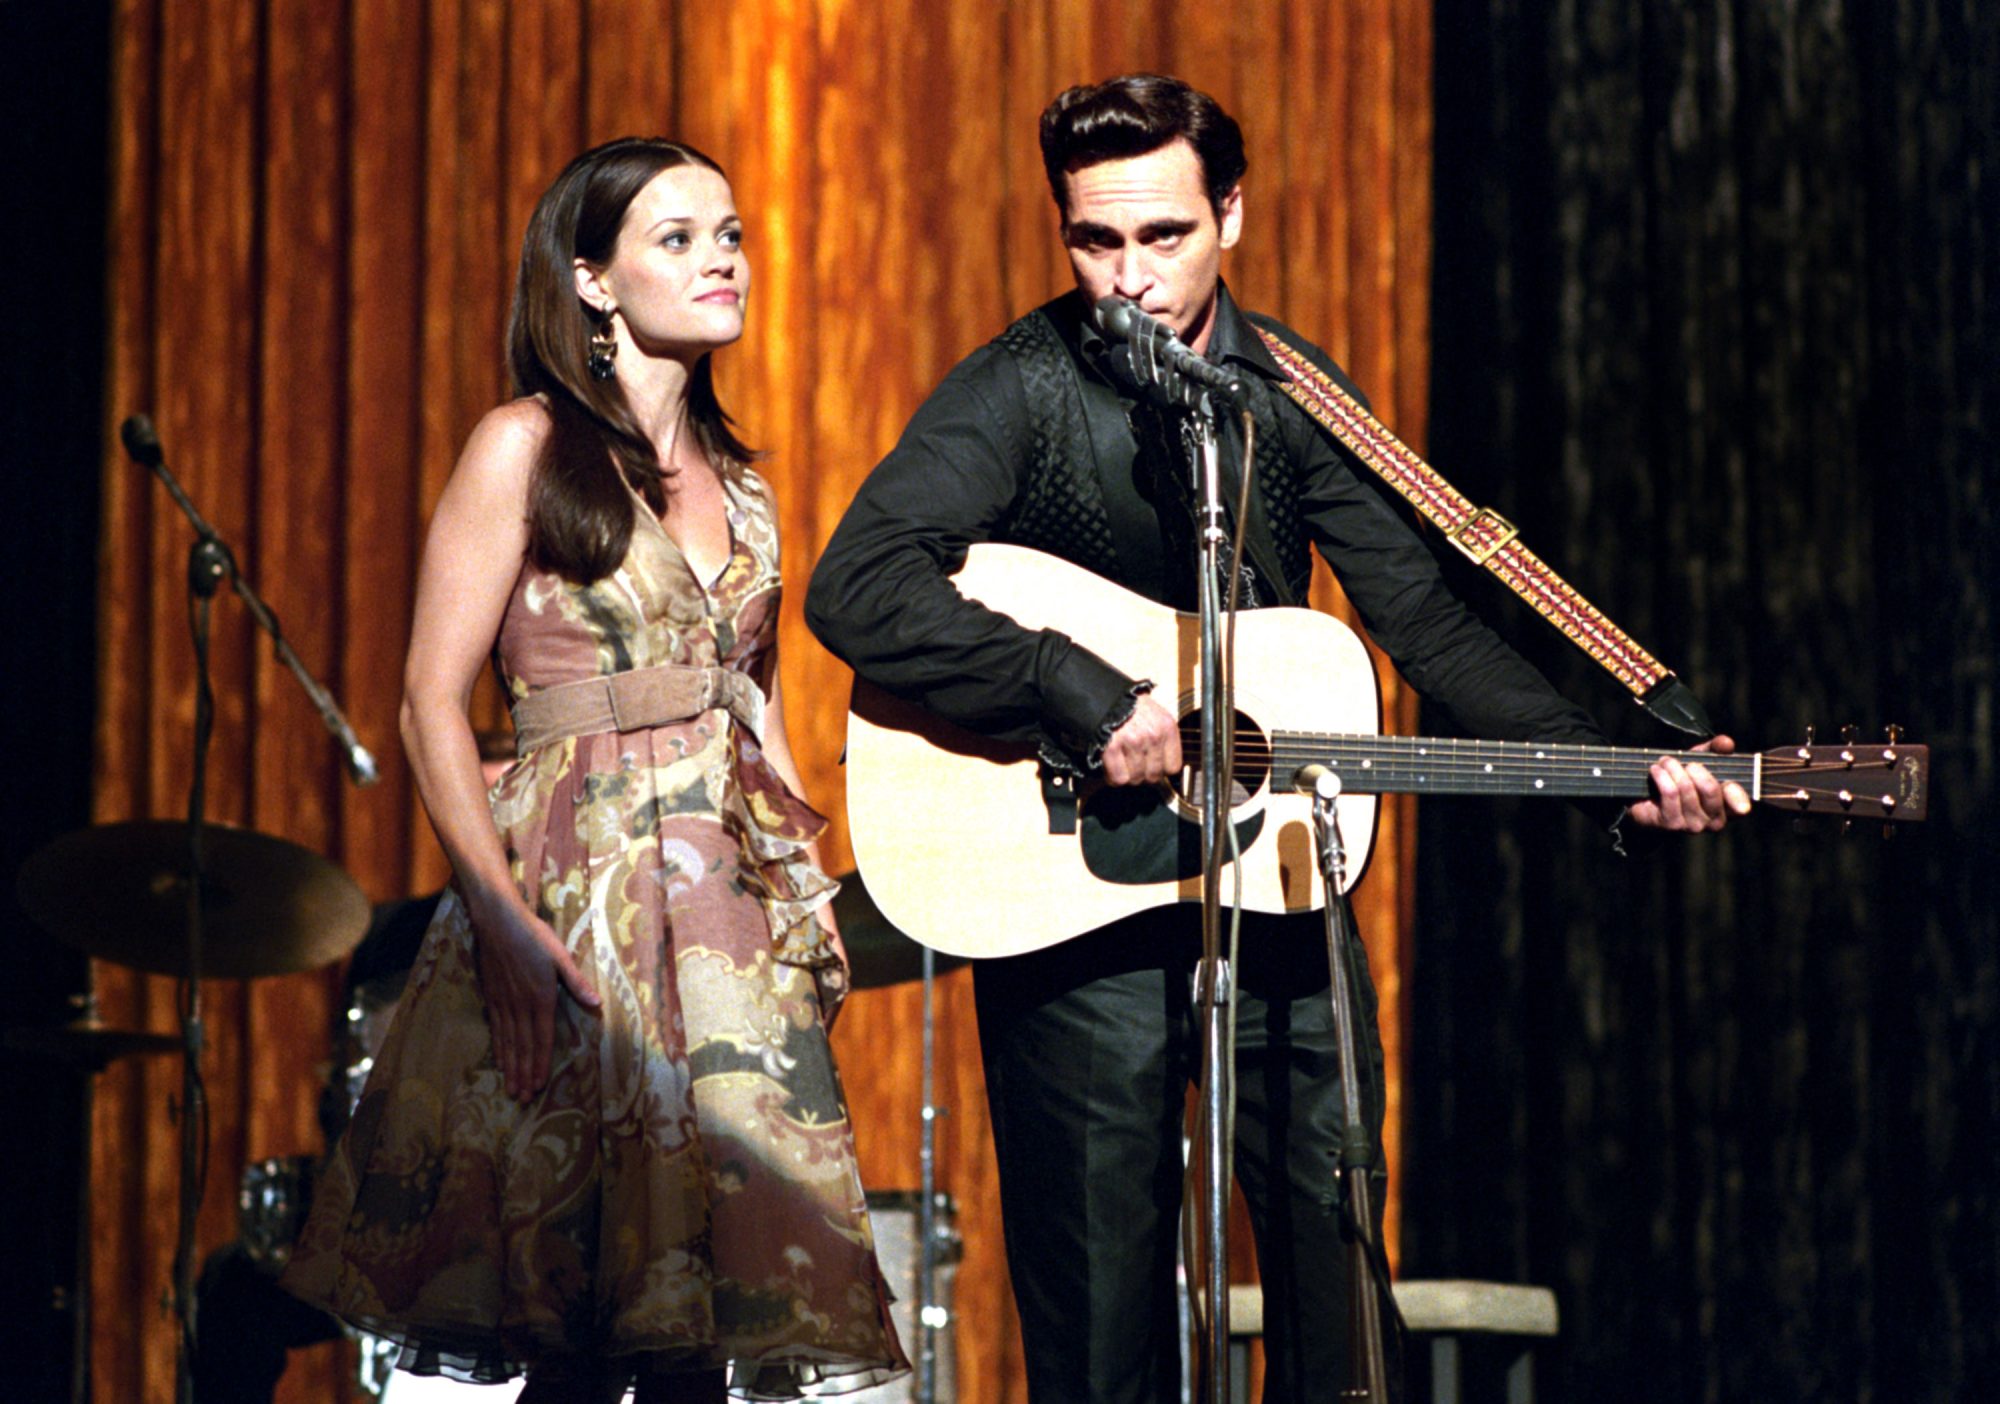 Reese Witherspoon, Joaquin Phoenix in wALK THE LINE